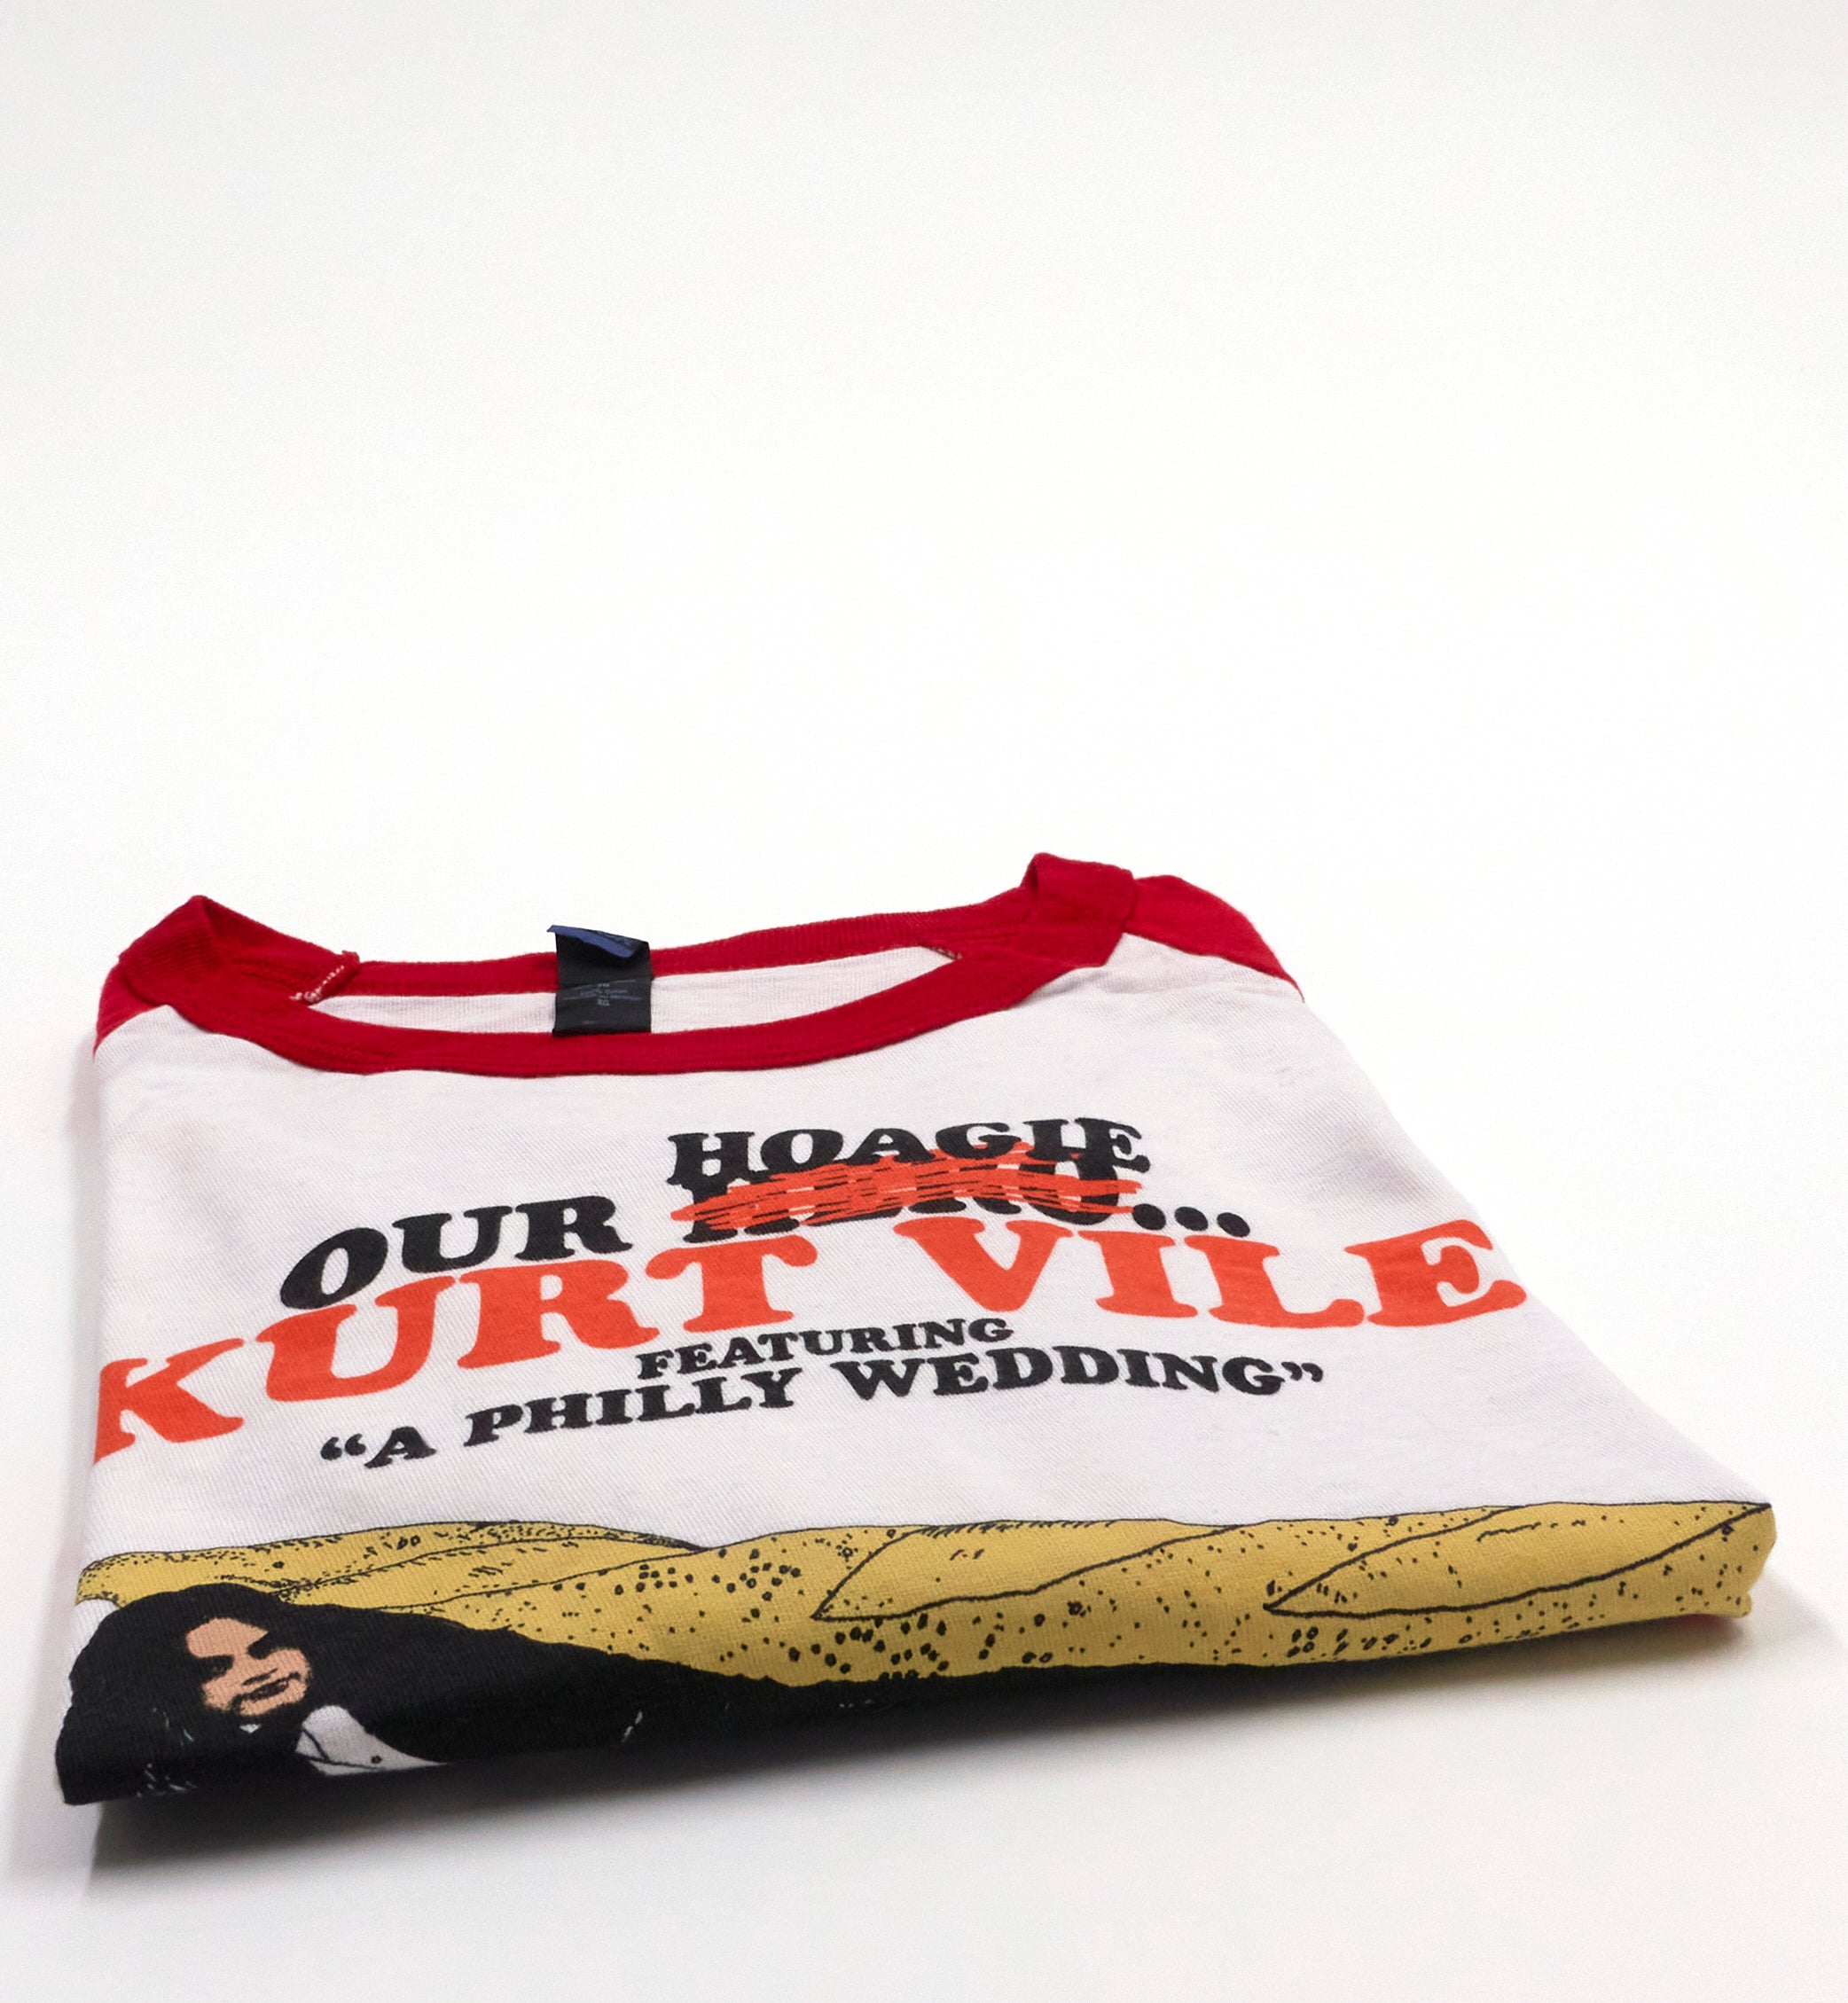 Kurt Vile – Our Hoagie Artwork by Perry Shall 2013 Tour Shirt Size XL